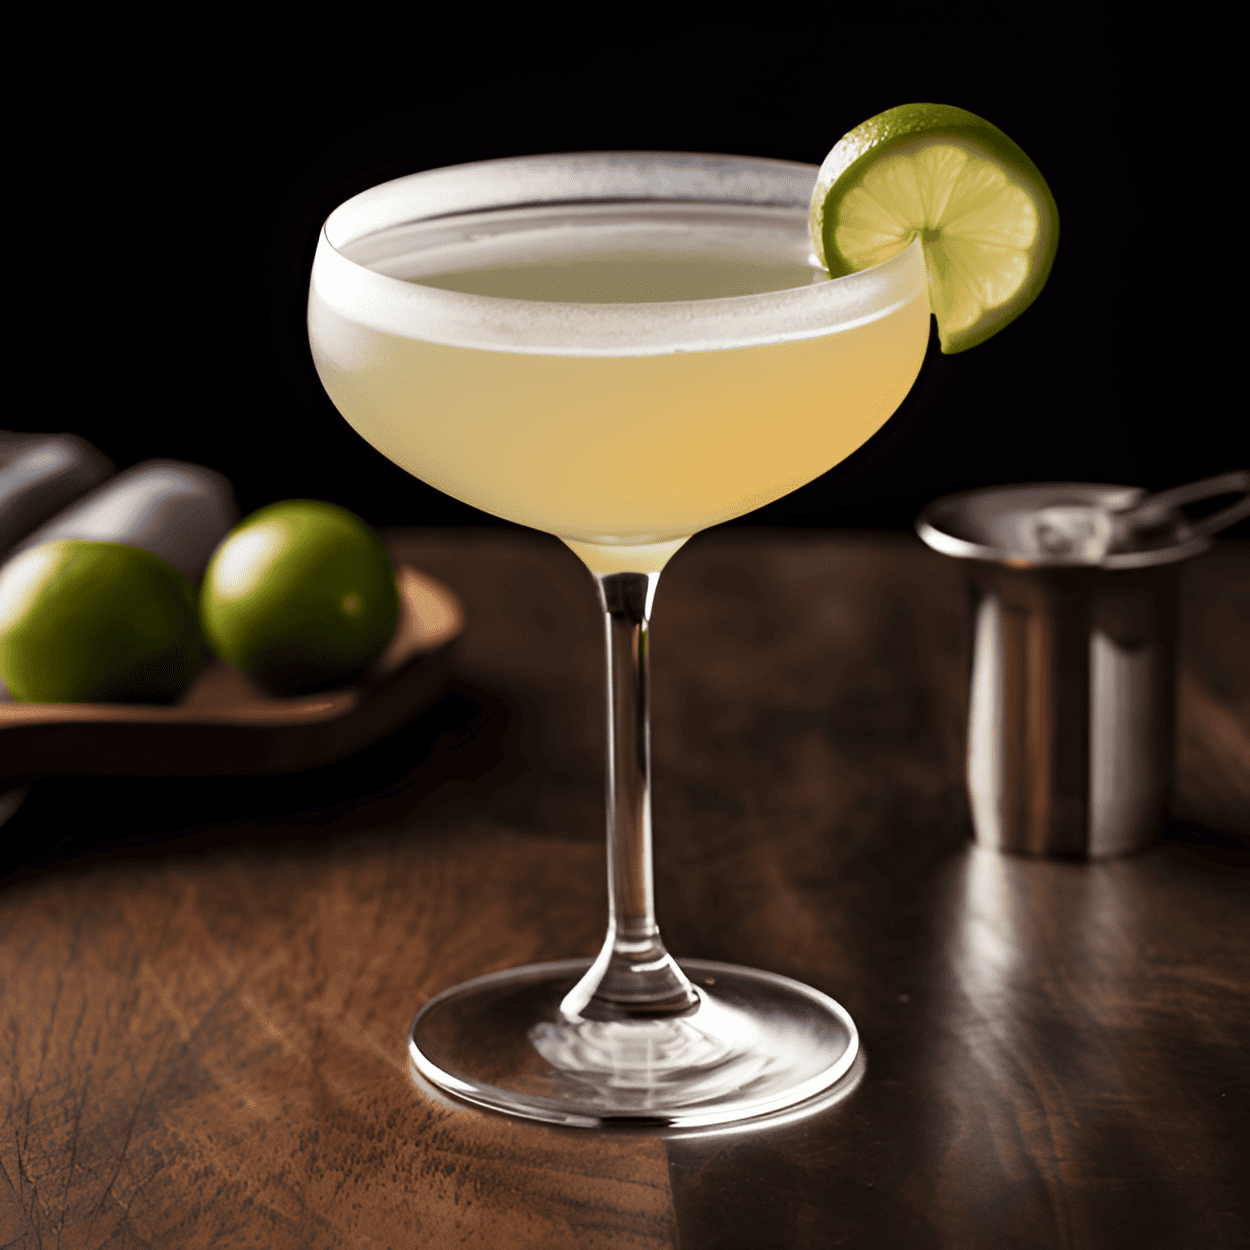 Hillary Clinton Cocktail Recipe - The Hillary Clinton cocktail is a complex blend of sweet, sour, and bitter flavors. It's strong, but not overpowering, with a smooth finish that leaves a lingering taste of citrus and spice.